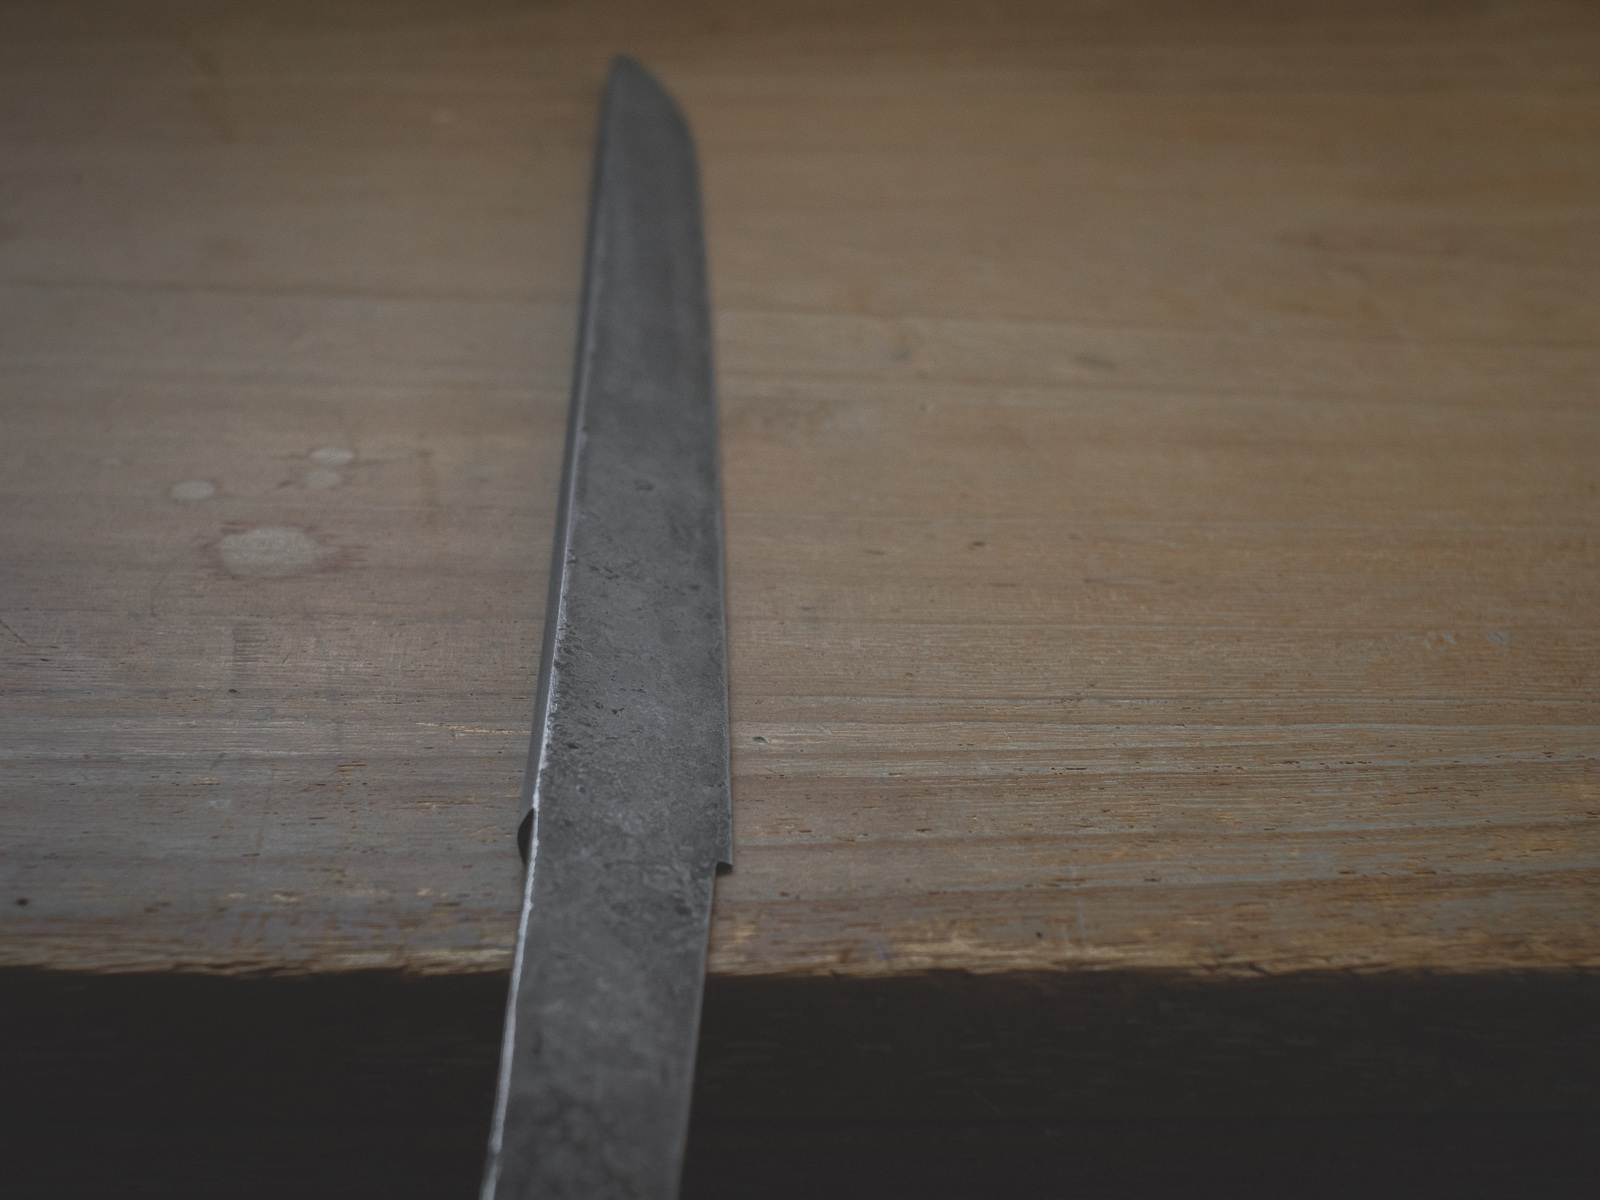 Island Blacksmith: Charcoal forged knives from antique steel.